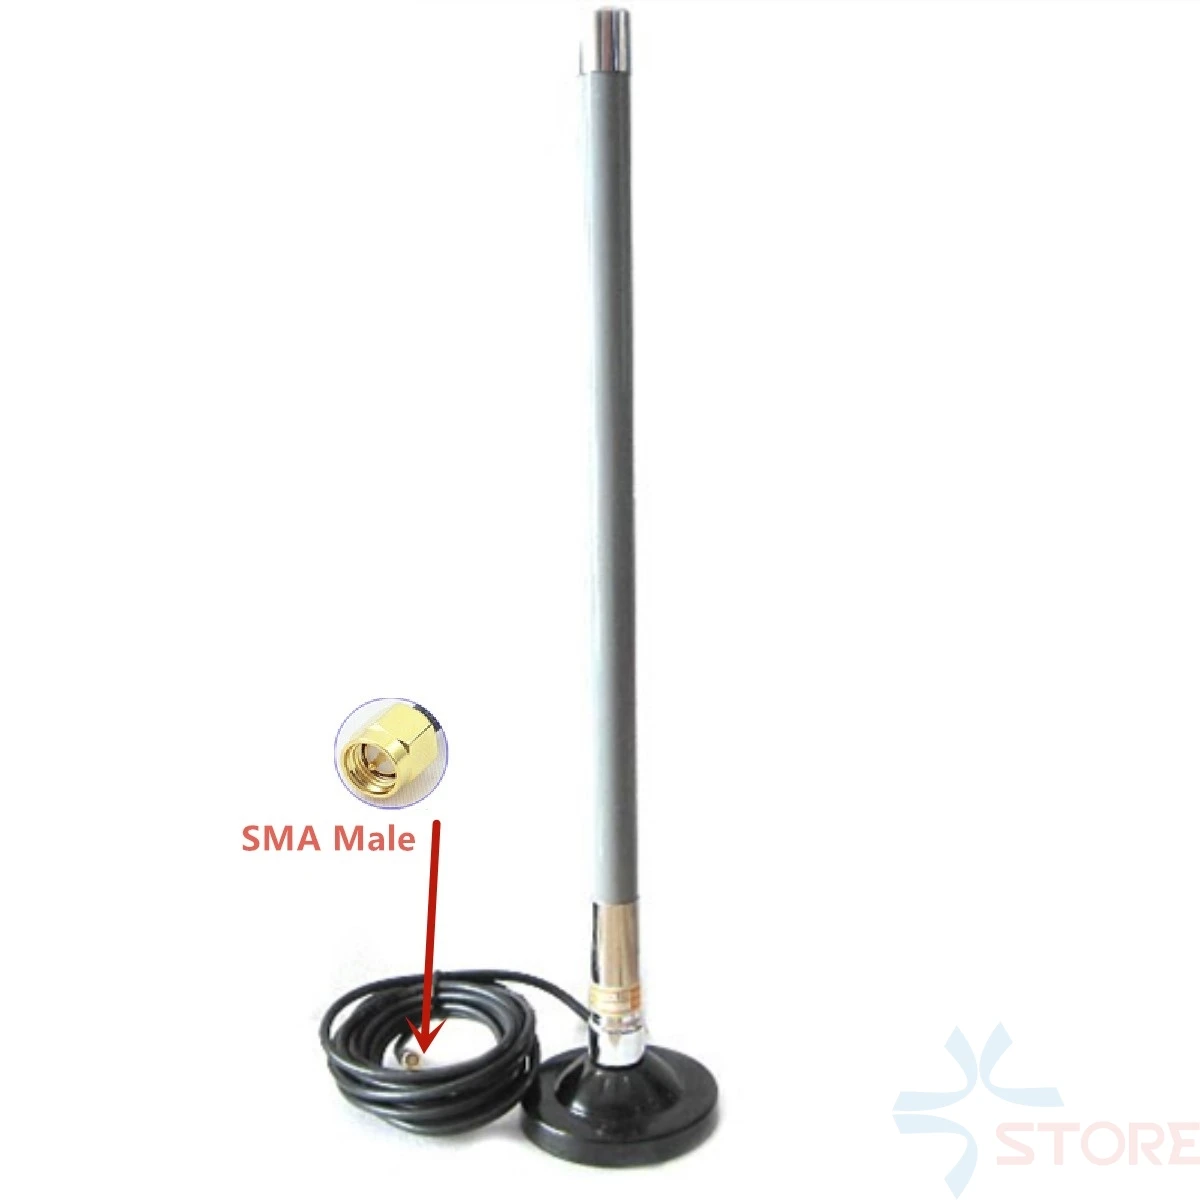 

1.2Ghz 16DB Antenna Long 45cm Strong magnetic big sucker fiber glass Antenna 1.2G with 3M SMA Male cable